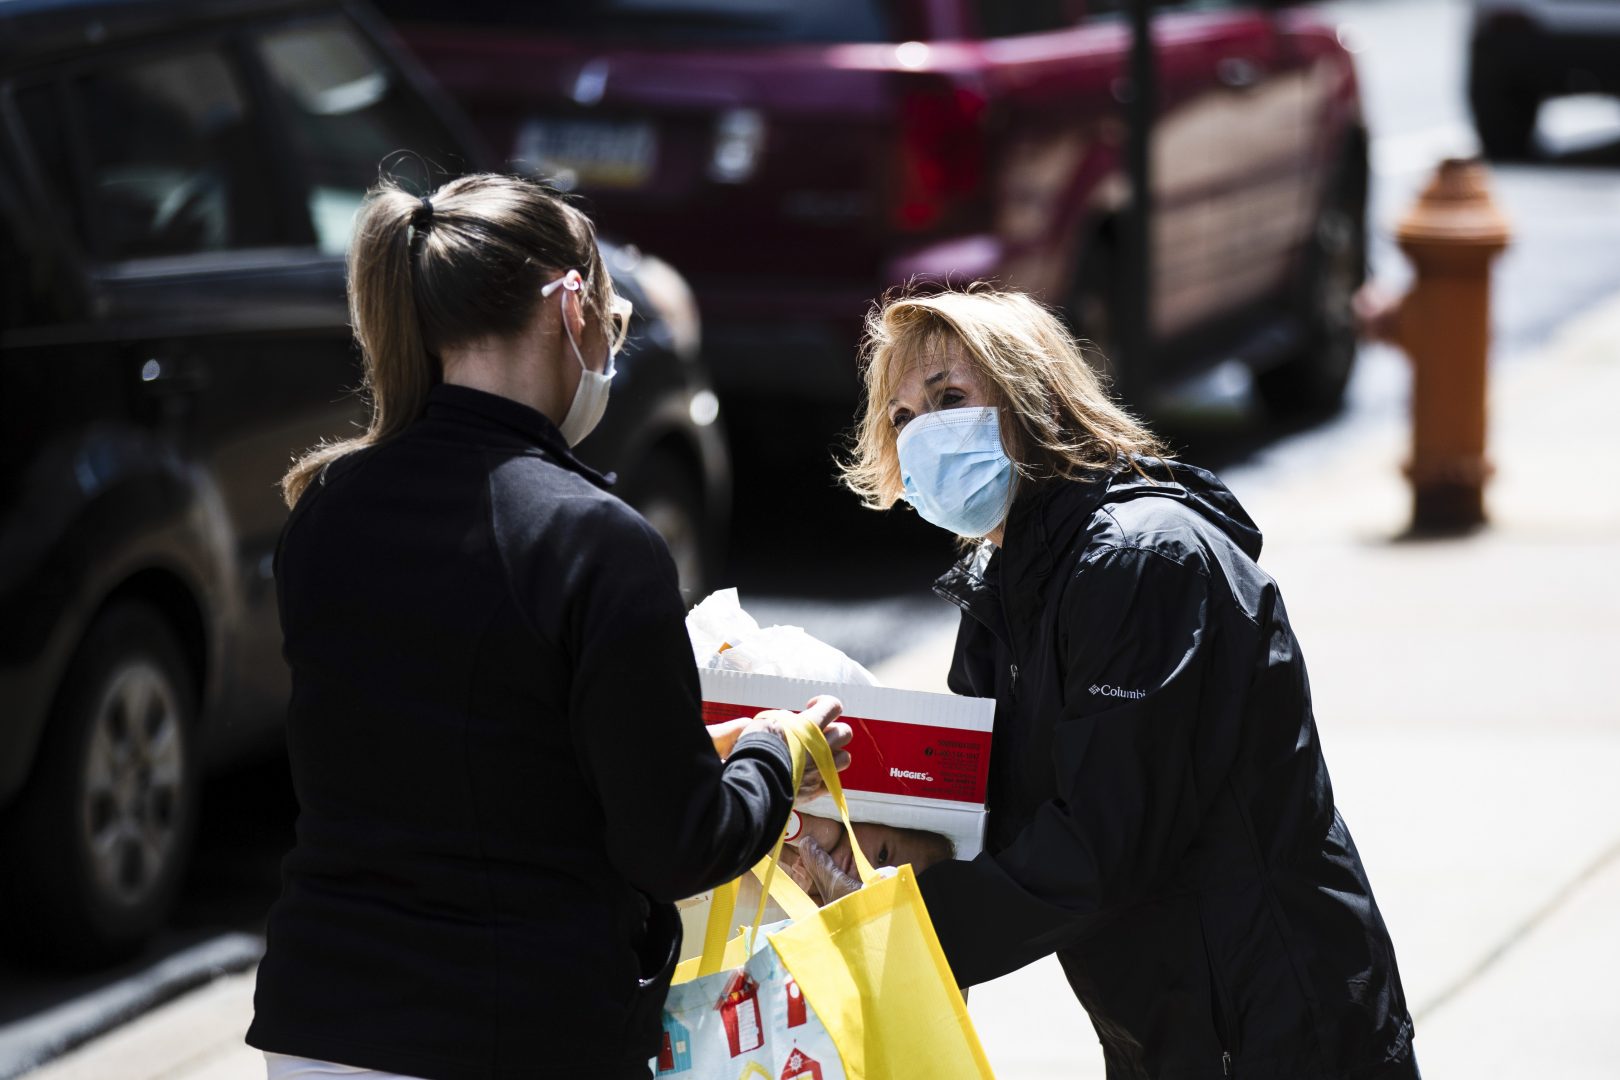 Nita Weightman, right, brings diapers and food for curbside pickup to a family in need in Philadelphia, Tuesday, April 21, 2020. .